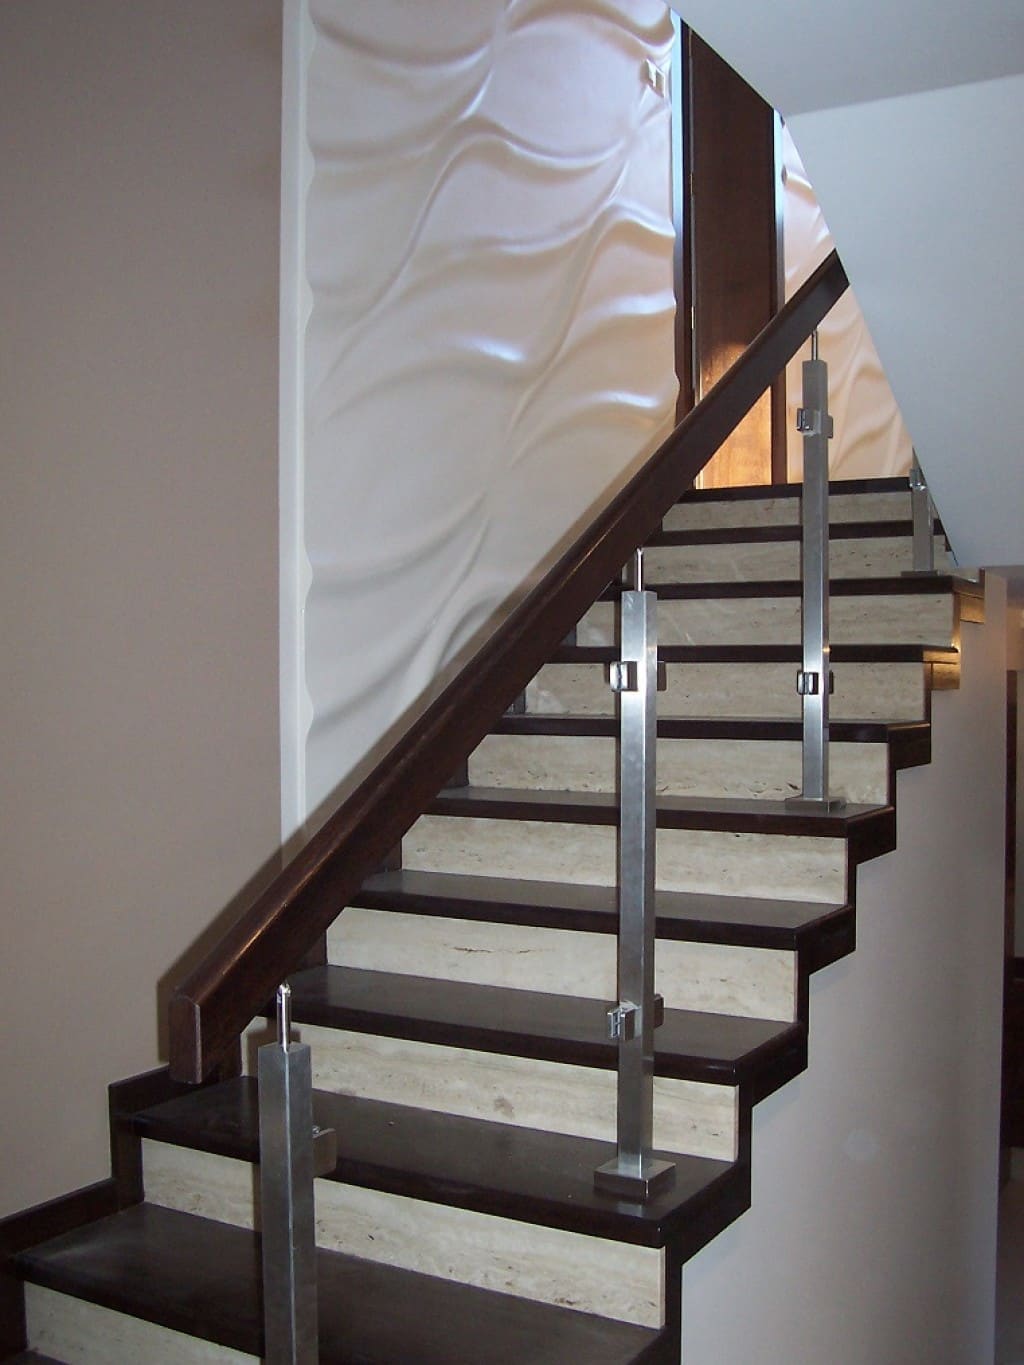 Blog - How to design interior stairs?